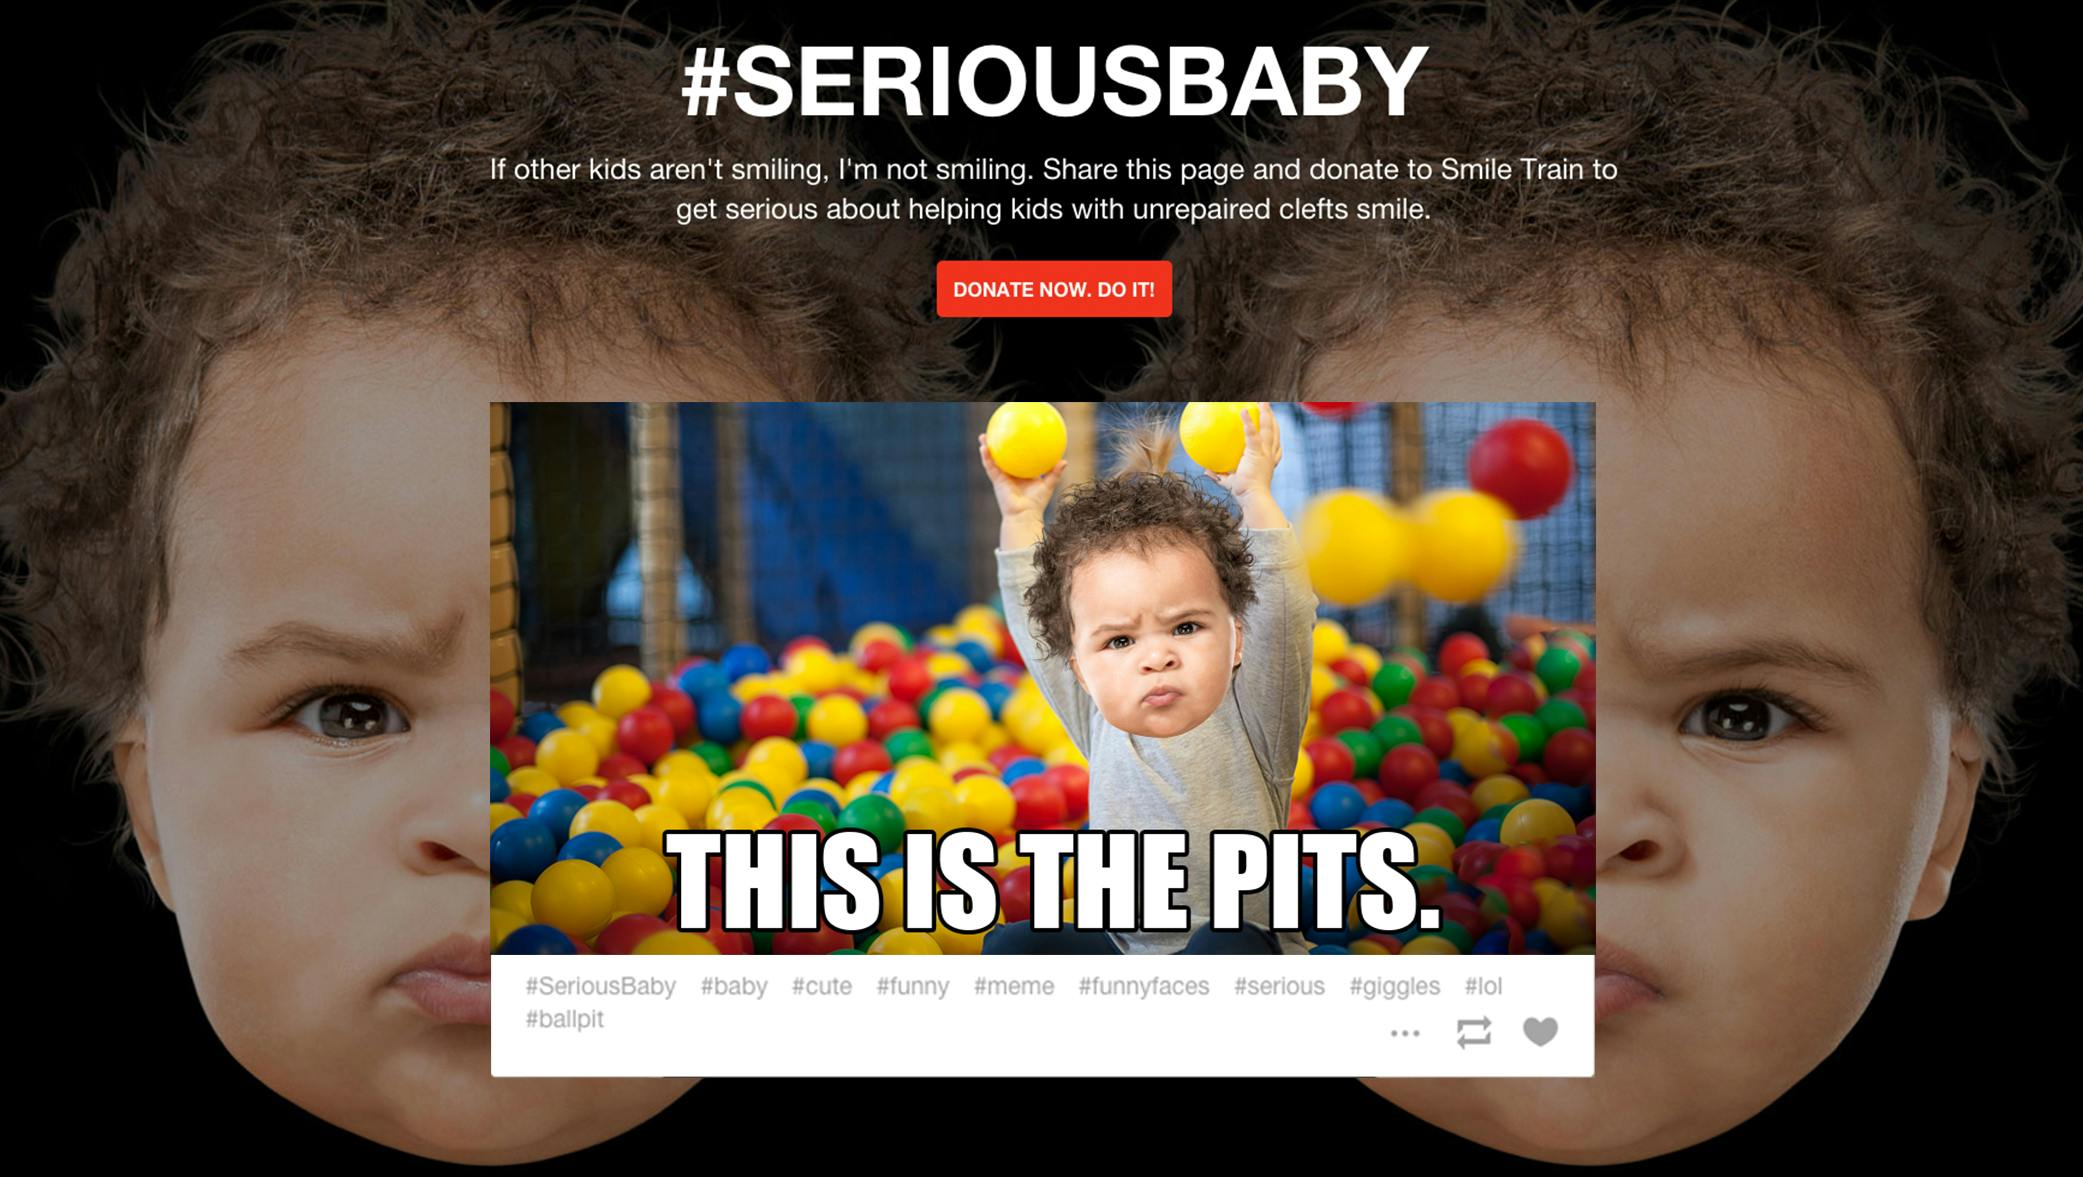 Memes in marketing: Seven memorable examples from brands